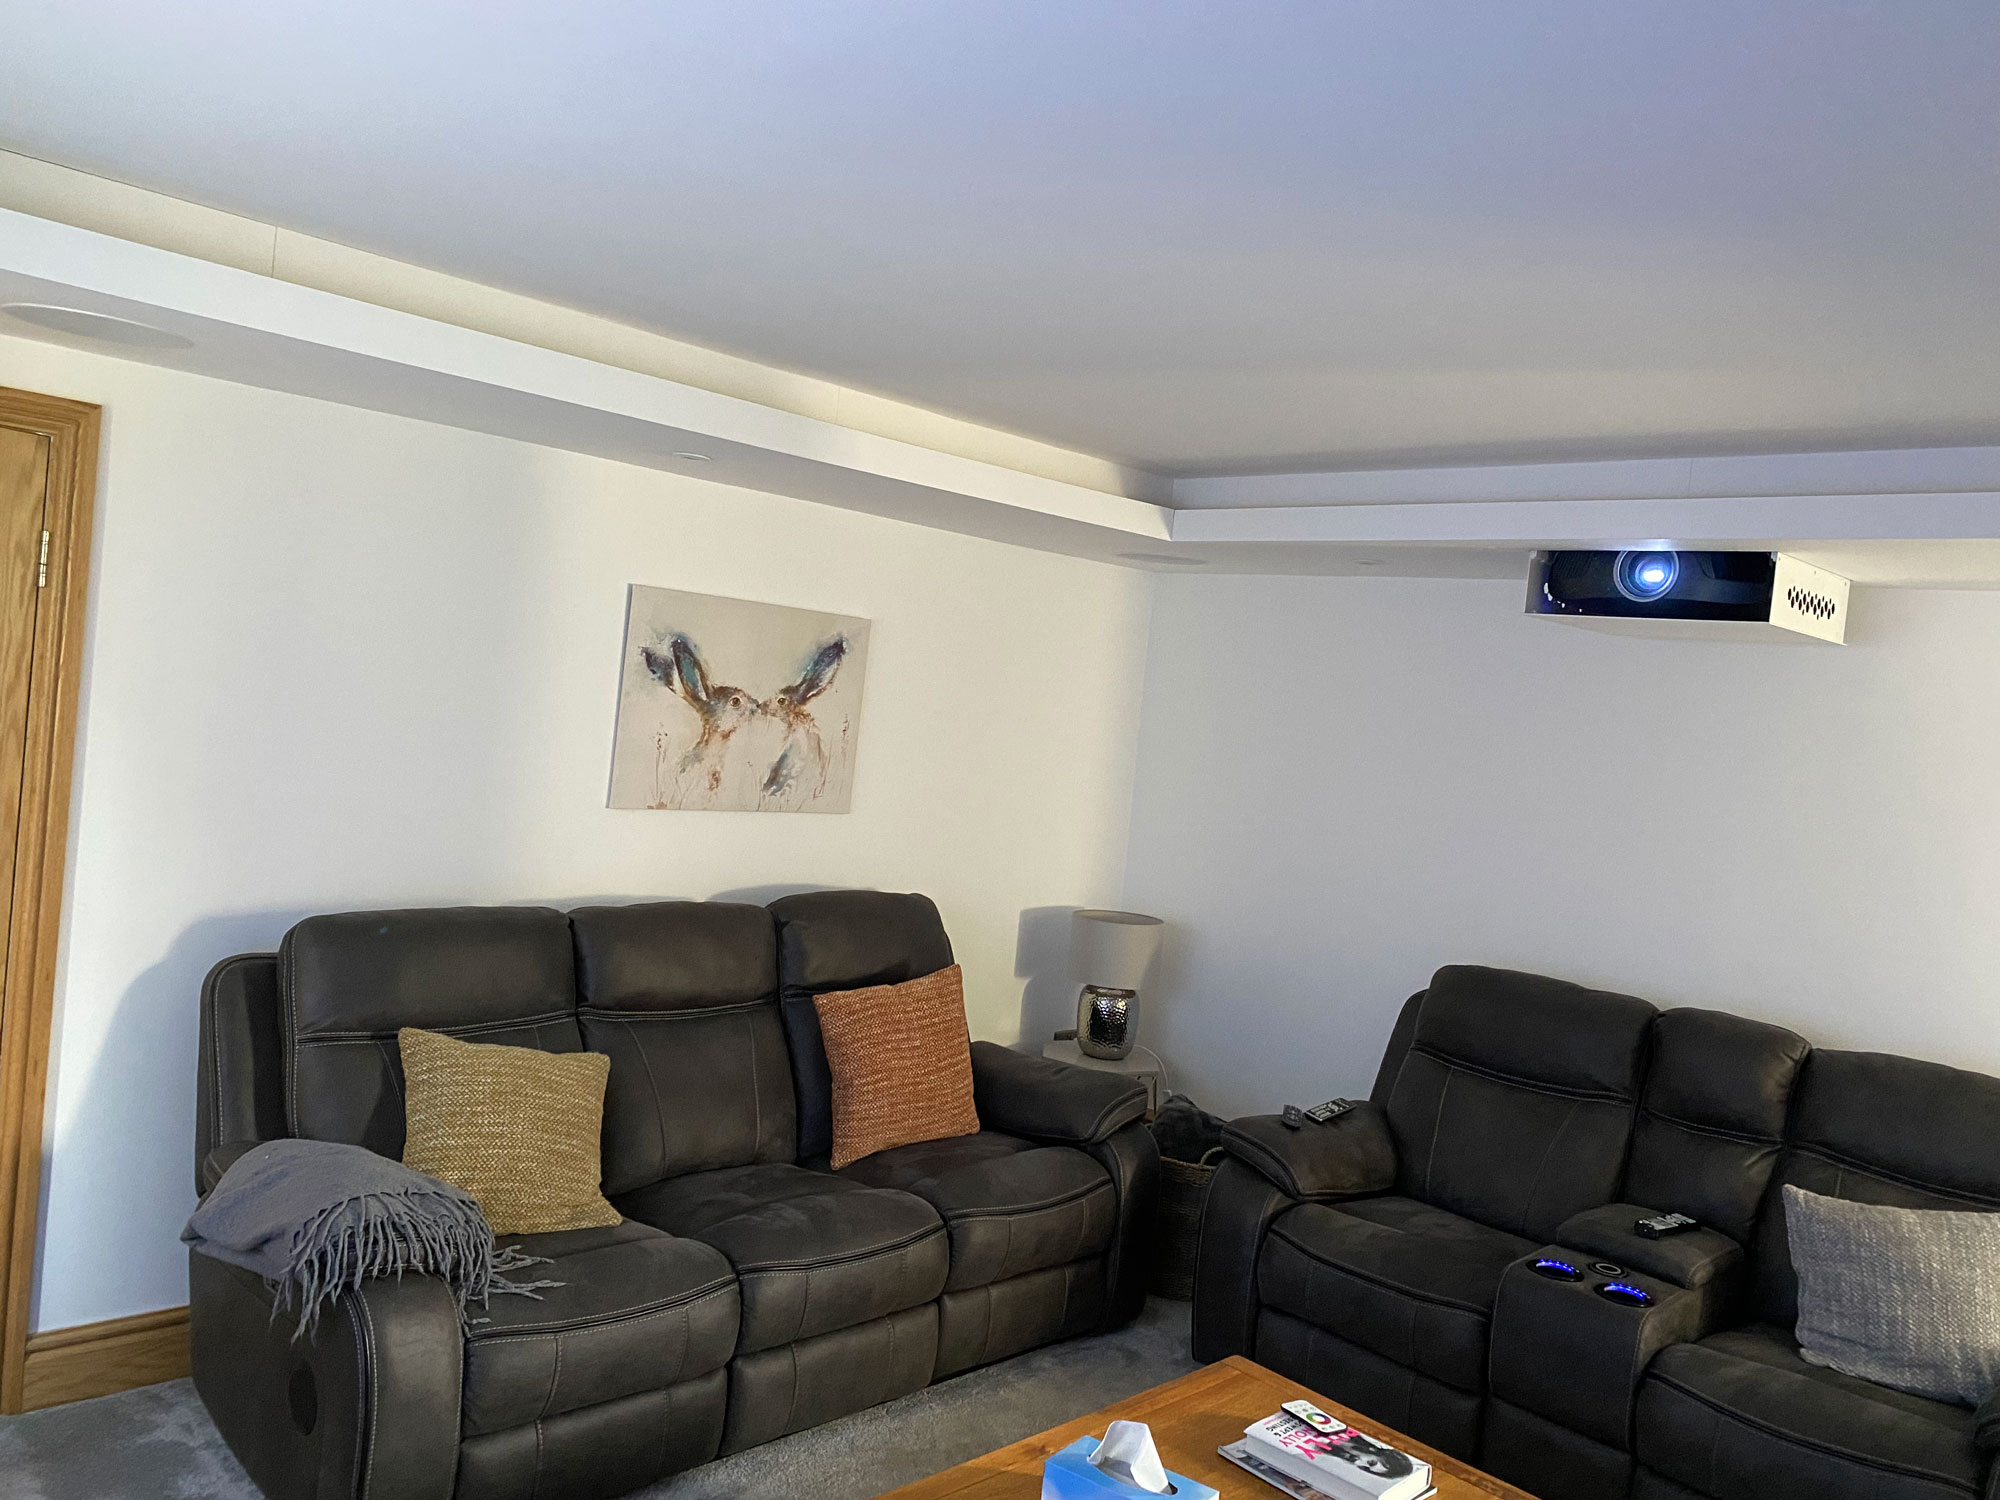 projector lift in ceiling with two brown sofas below